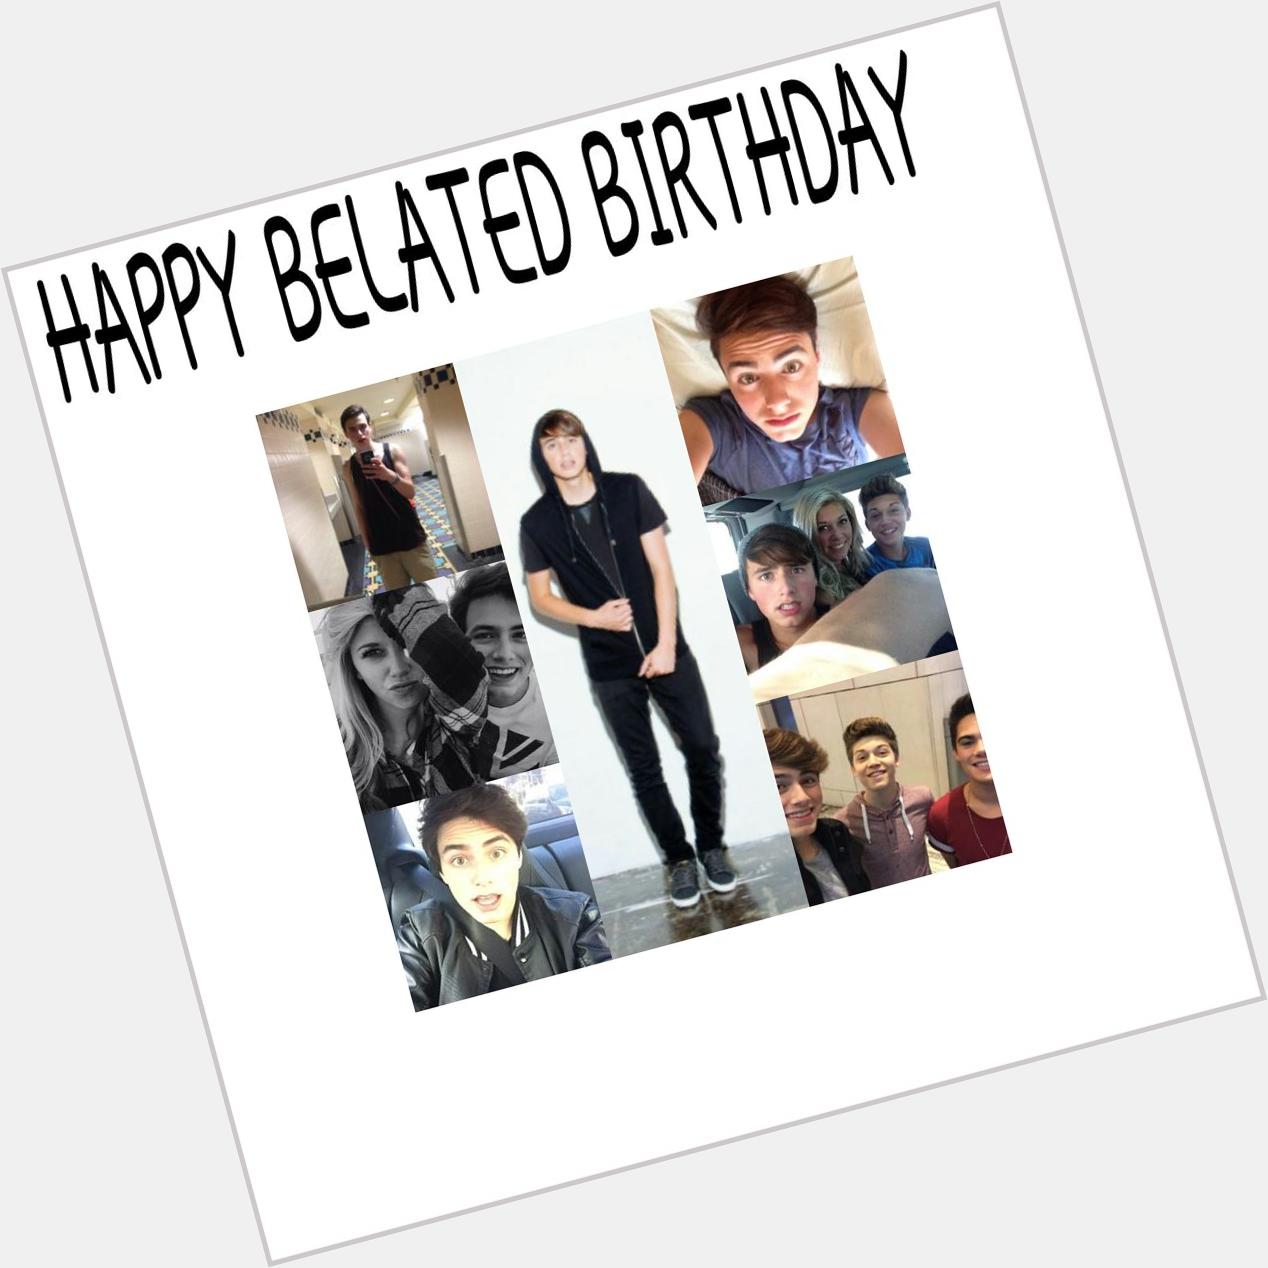   hope you like my collage i made and sorry its so late happy birthday though!!     16th! 